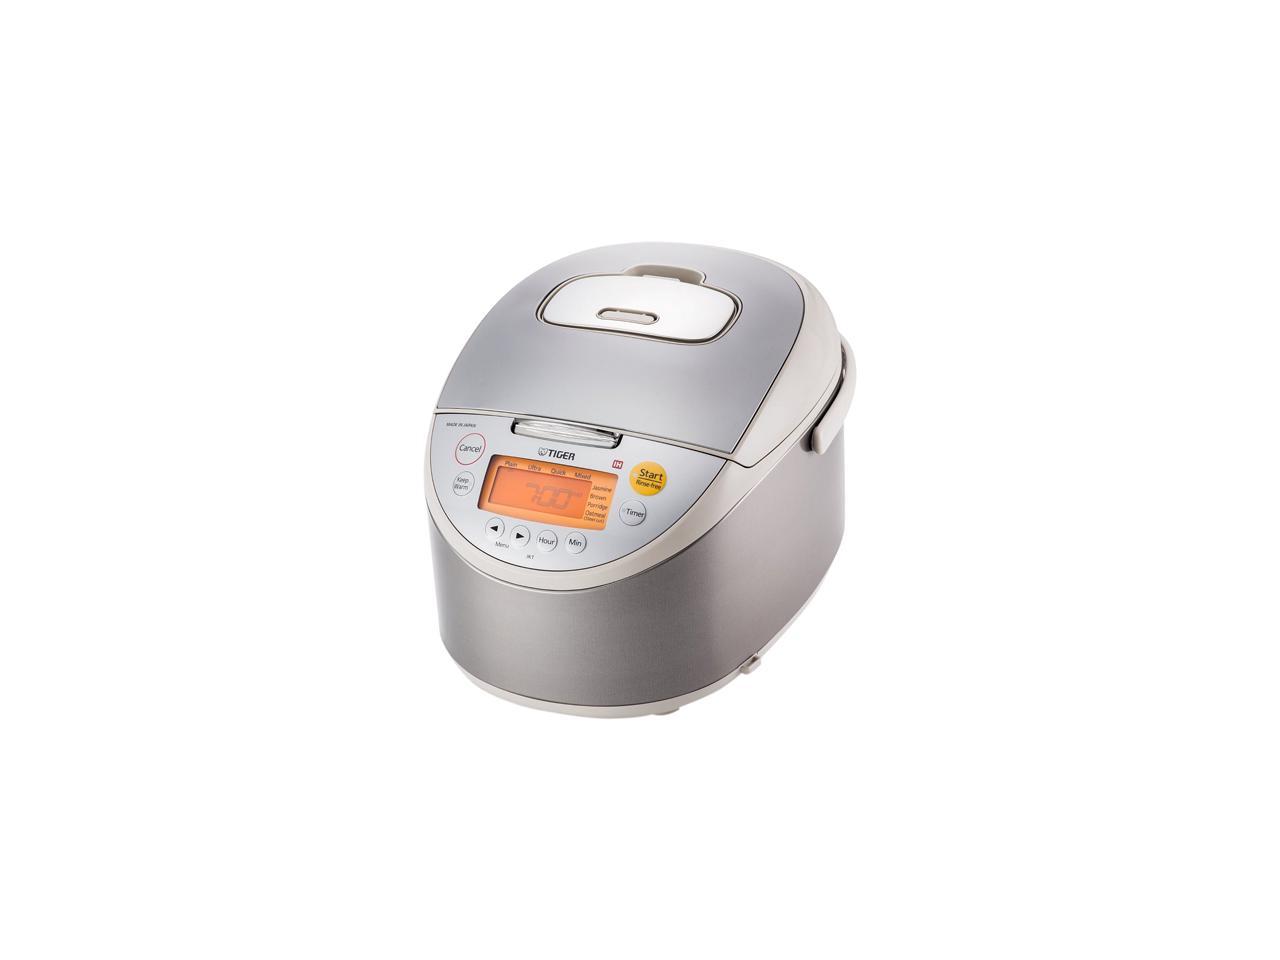 Tiger Jkt B18u Induction Heating Rice Cooker And Warmer 20 Cups Cooked